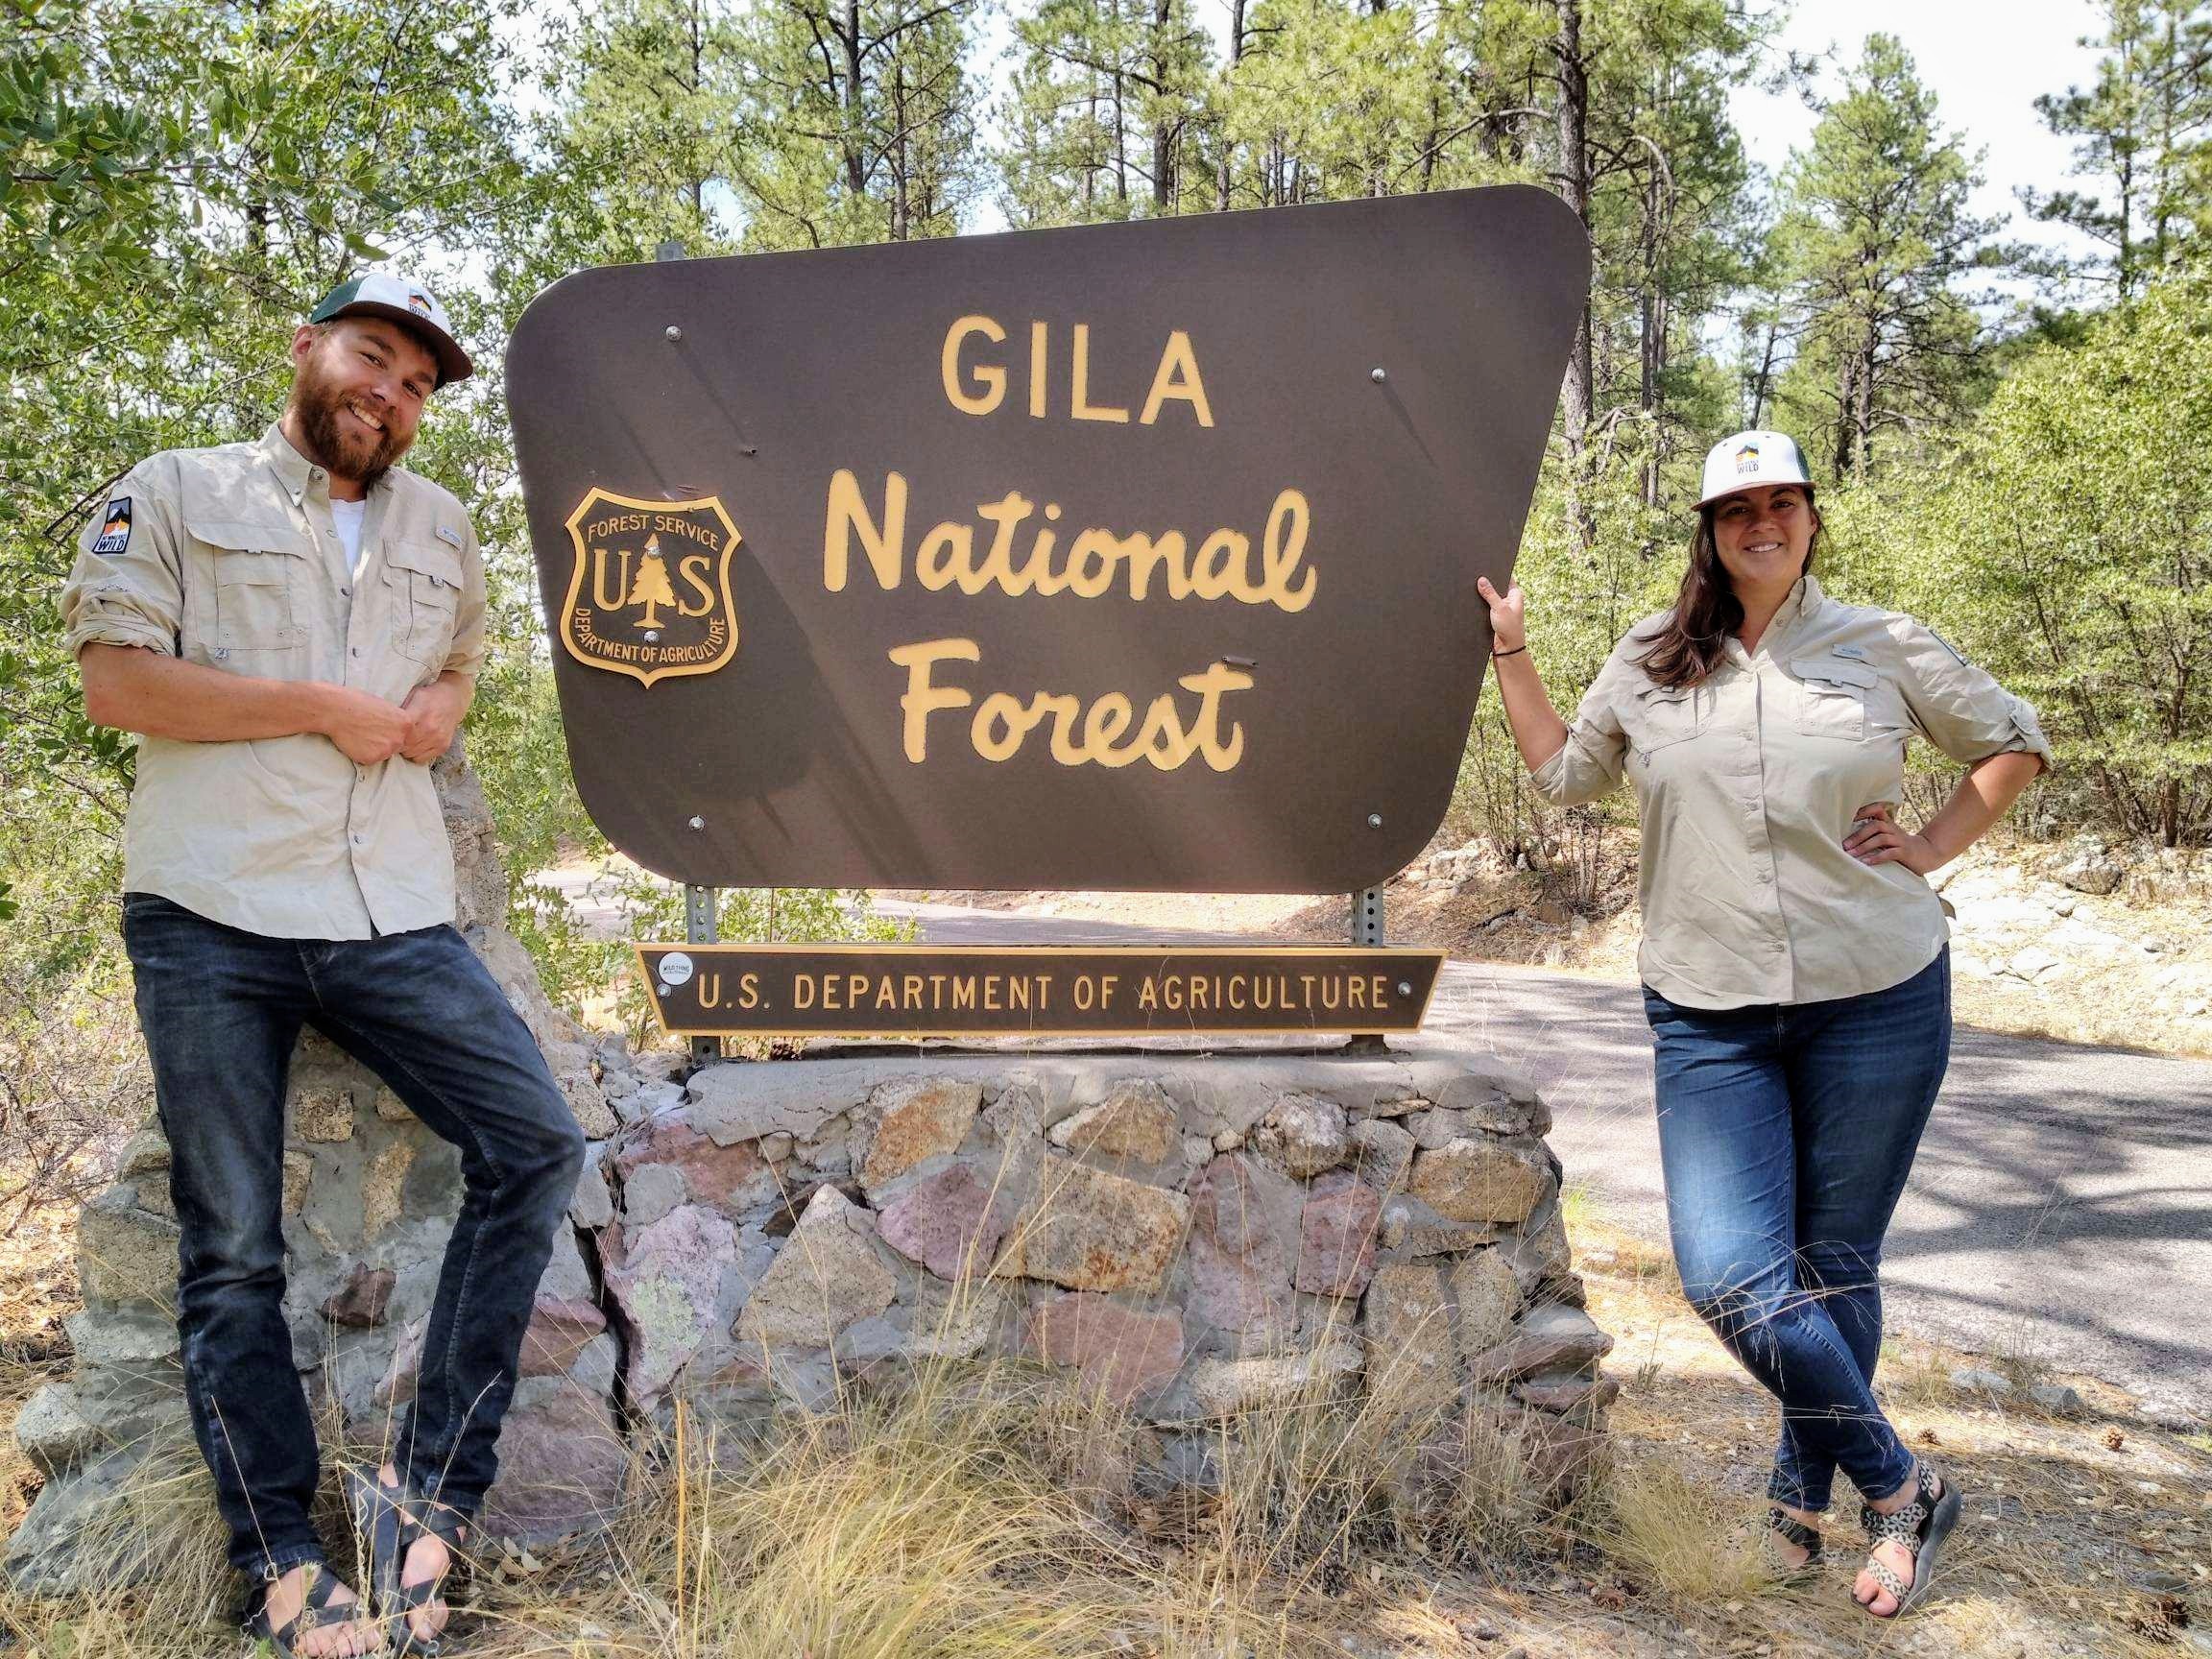 Wilderness stewards in Gila National Forest plan to engage community